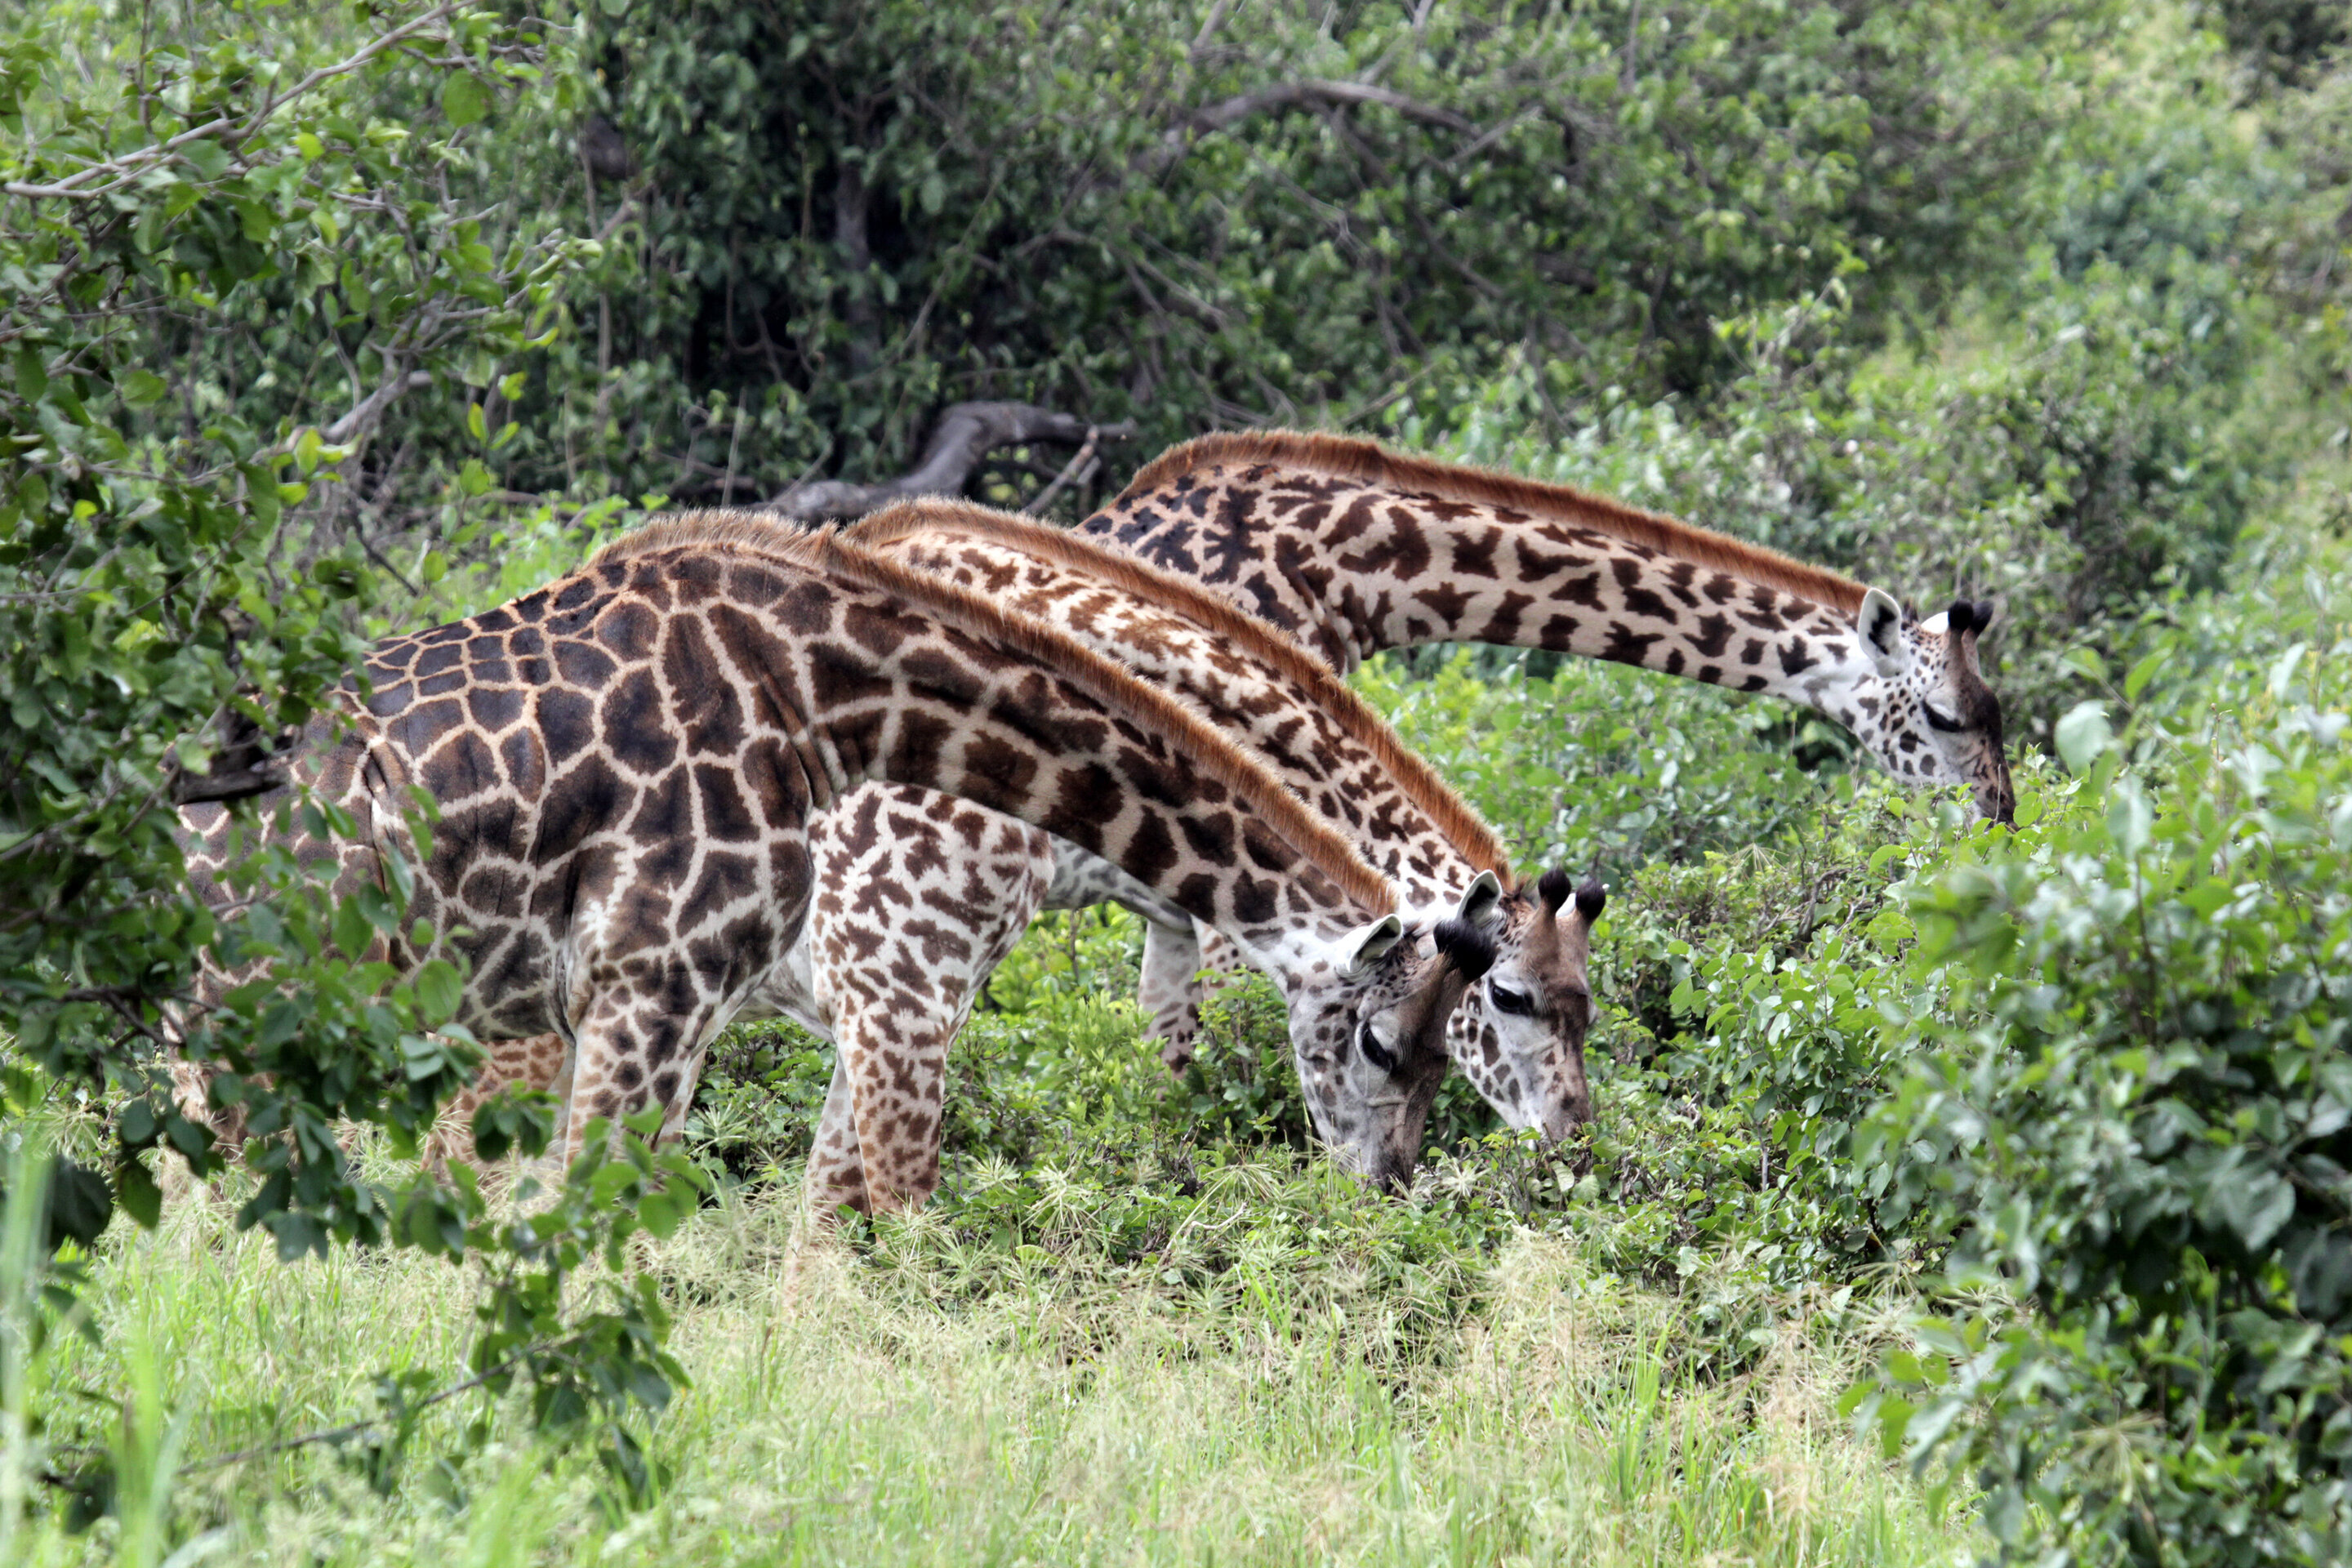 Friends matter: Giraffes that group with others live longer